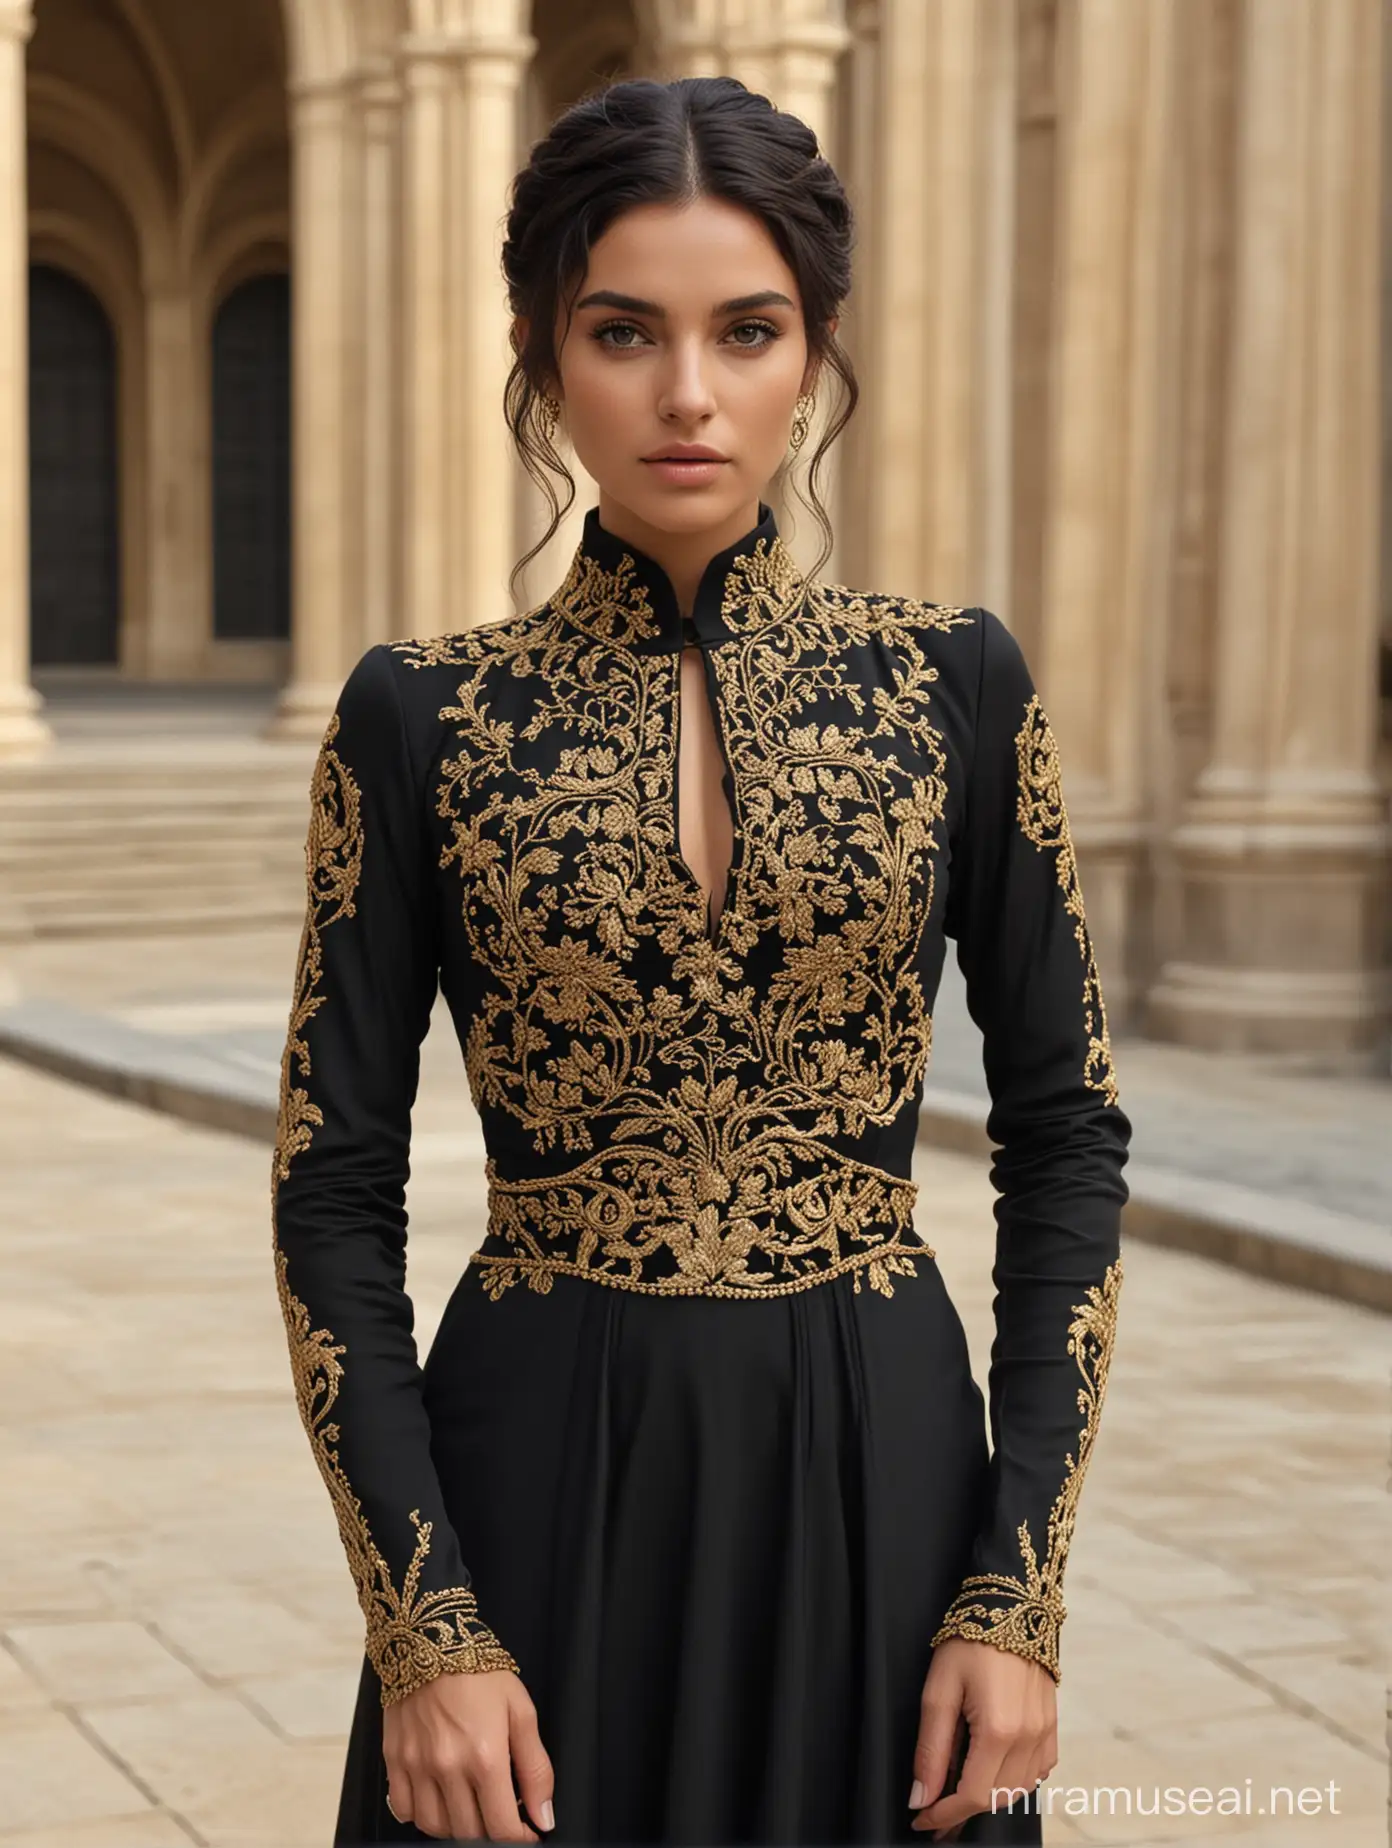 Elegant 23YearOld ItalianAustralian Woman in Black ValyrianInspired Gown with Gold Detail